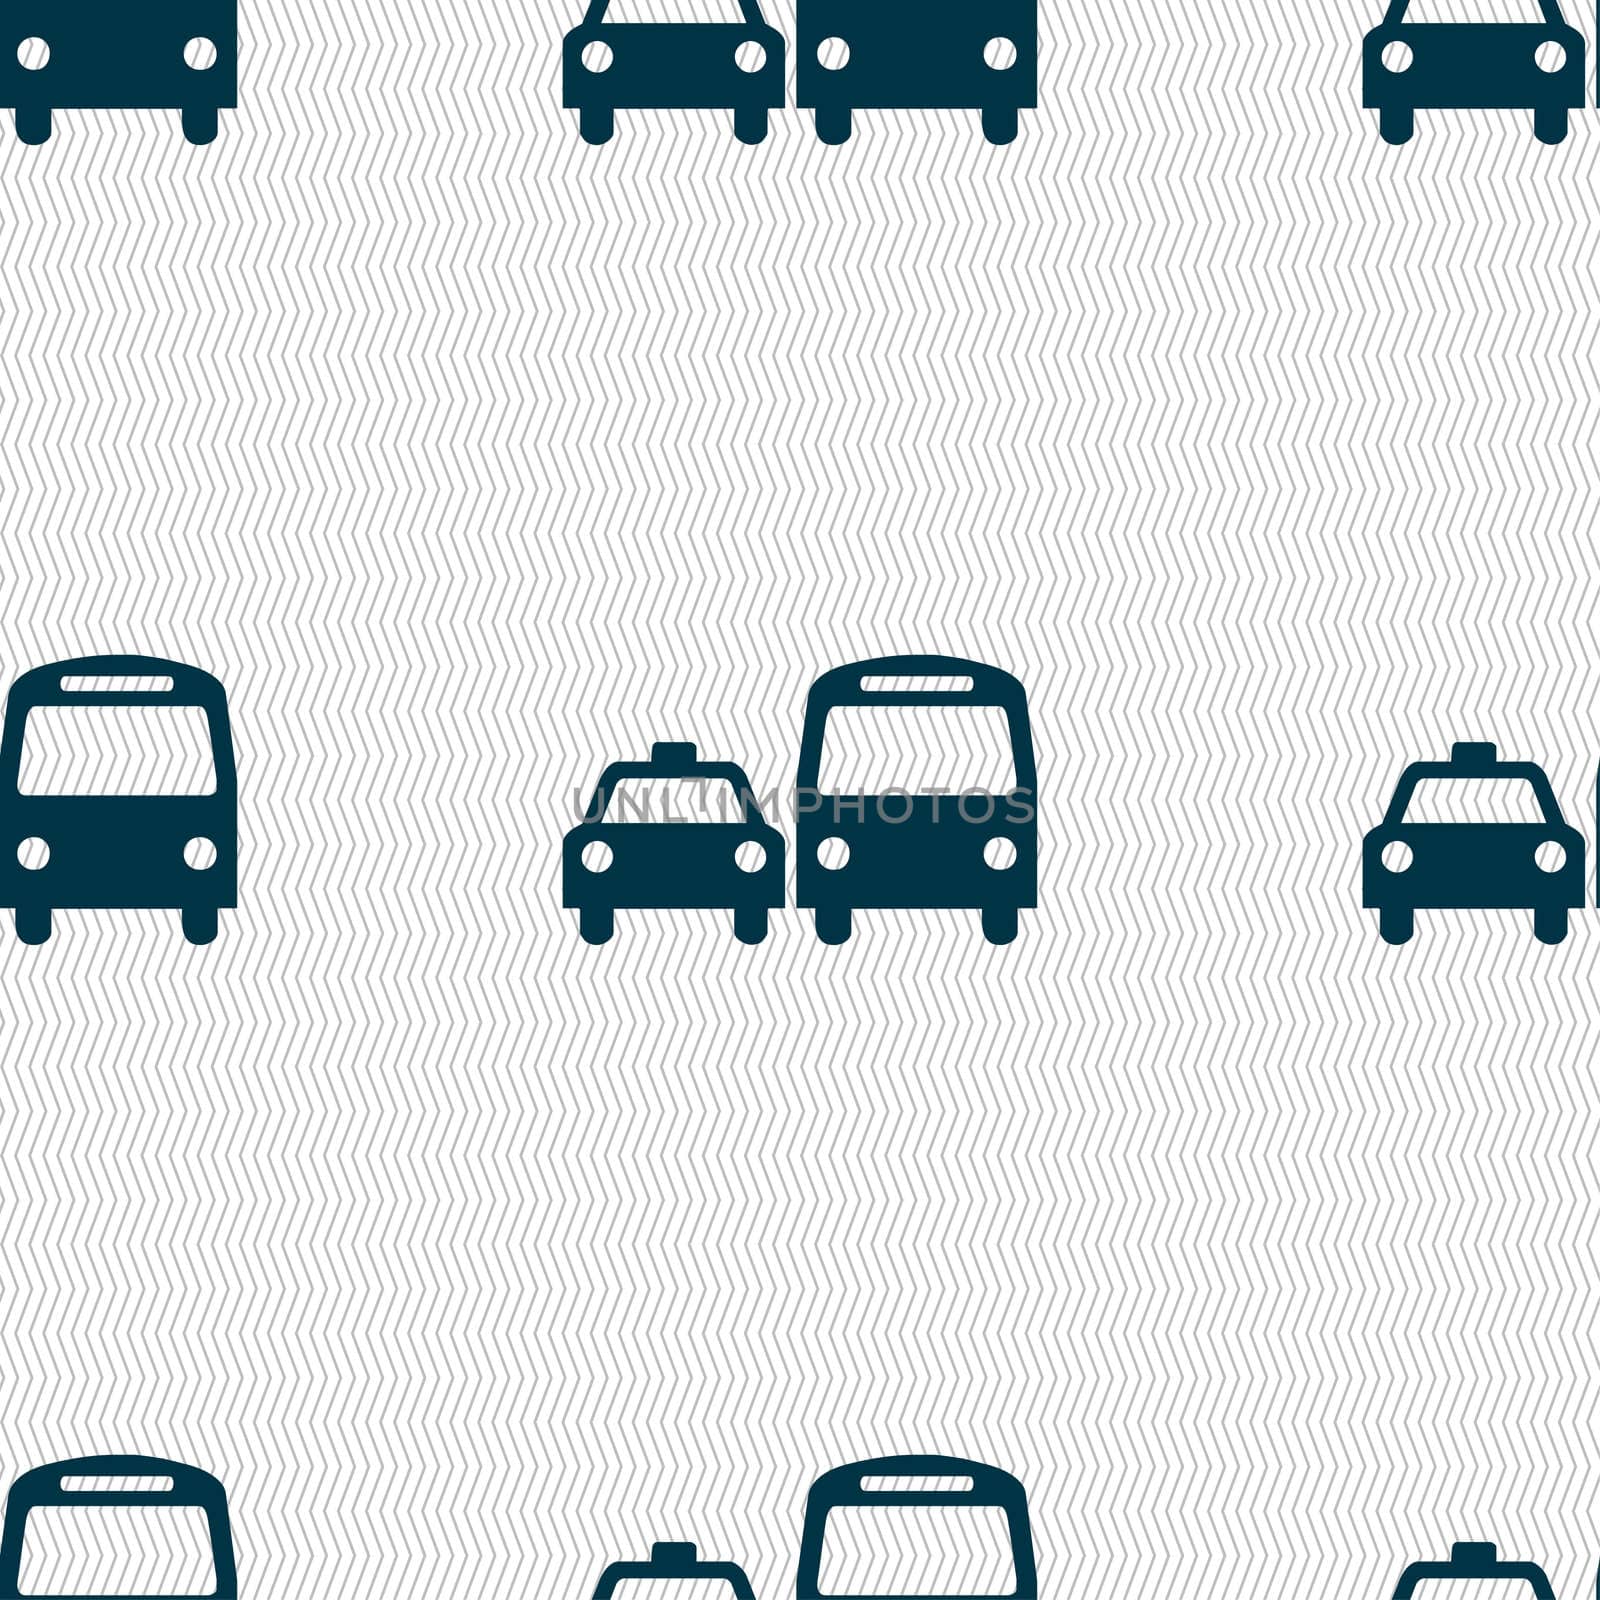 taxi icon sign. Seamless pattern with geometric texture. illustration